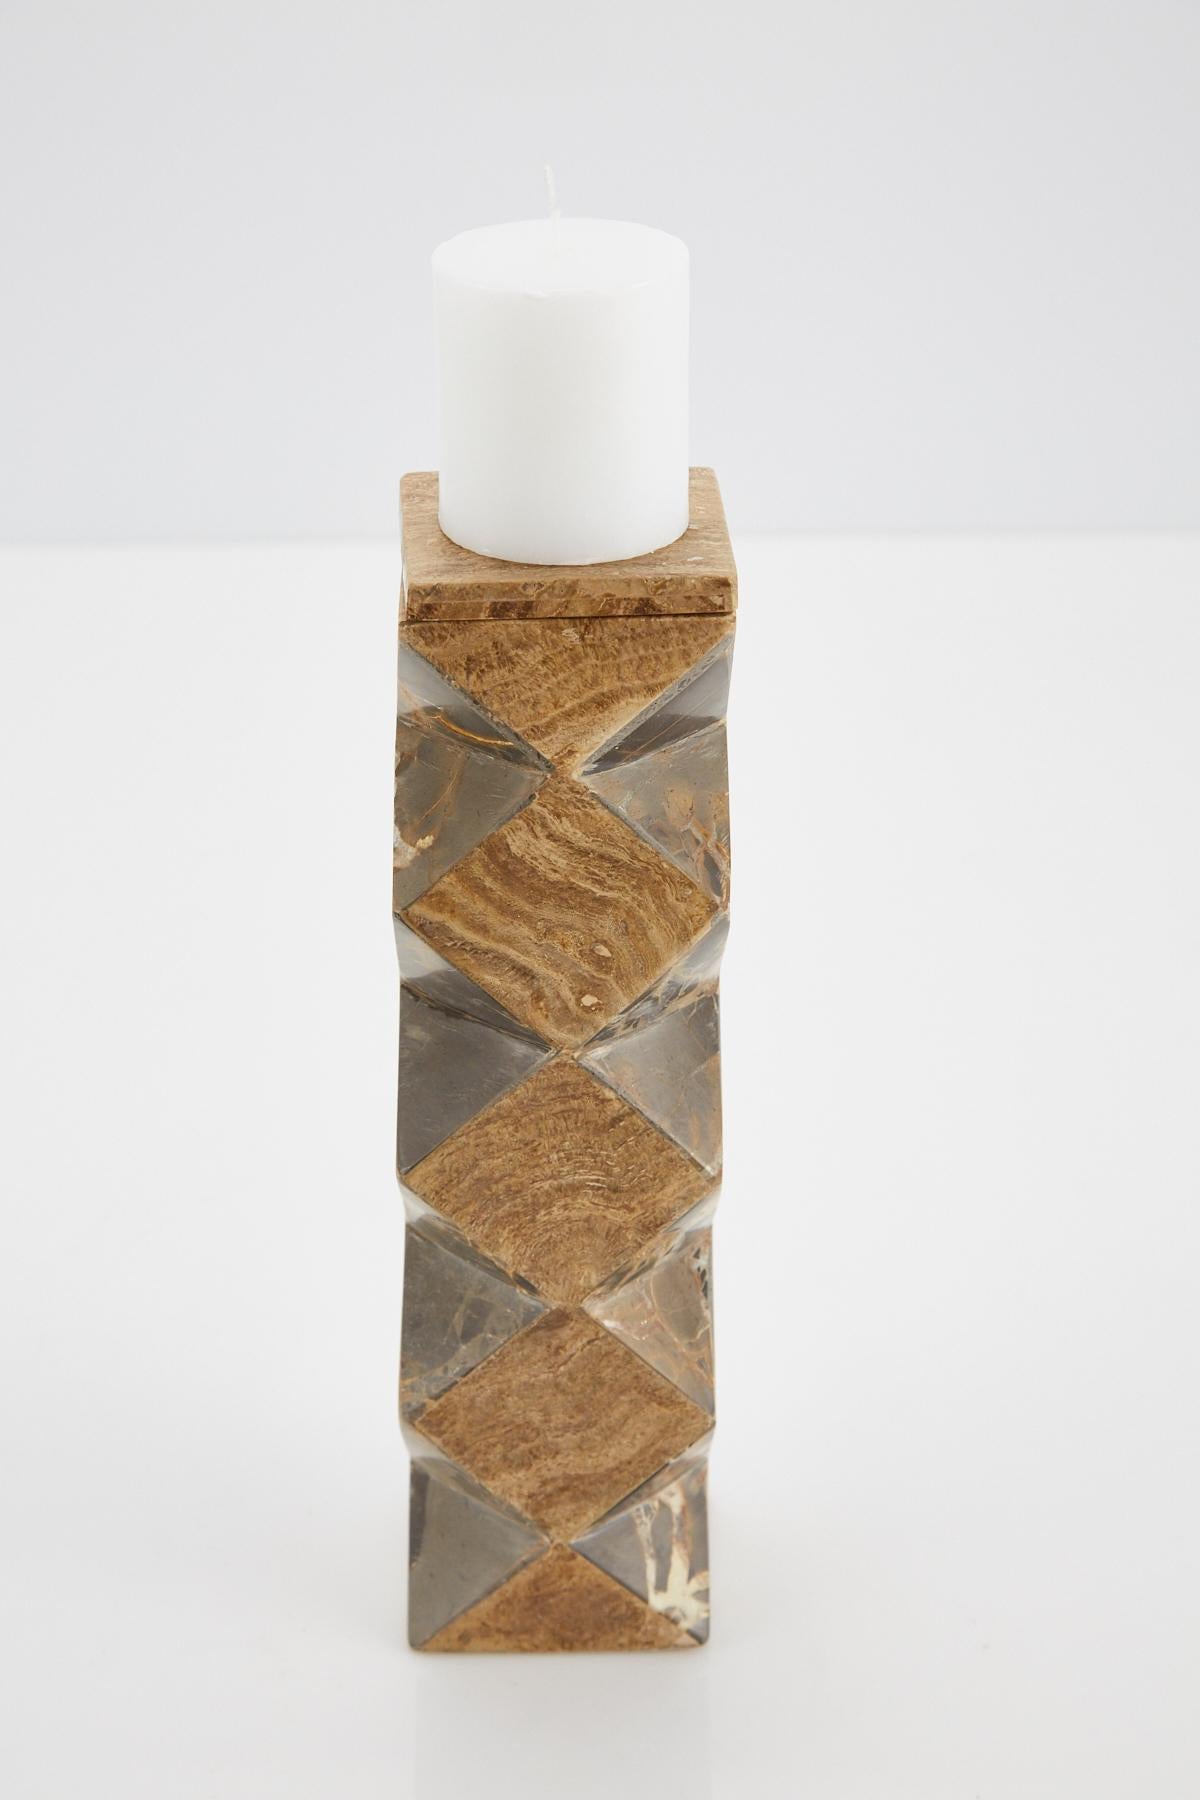 Convertible Faceted Postmodern Tessellated Stone Candlestick or Vase, 1990s (Postmoderne) im Angebot